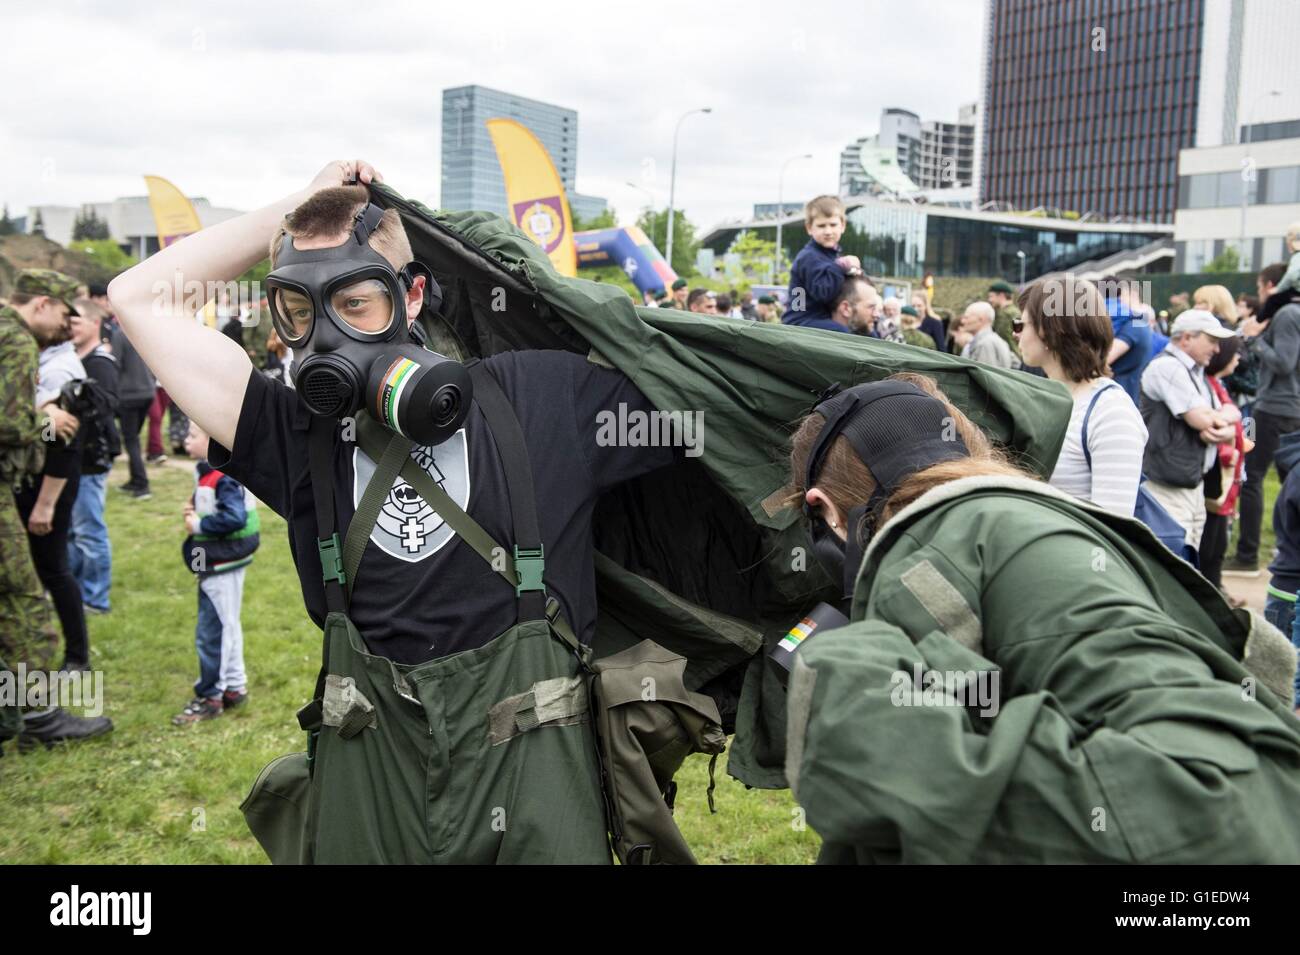 Vilnius, Lithuania. 14th May, 2016. People are trying chemical-proof suits in Vilnius, Lithuania, May 14, 2016. Lithuania celebrates Armed Forces and Public Unity Day in it's captial on Saturday. Troops of Lithuania, Germany, U.S., Luxembourg, Portugal, etc. brought their light weapons, military vehicles and other equipment to the public. Fighting Falcon F-16 of Portuguese air force and Black Hawk of the U.S. air force participated in the performance. Credit:  Alfredas Pliadis/Xinhua/Alamy Live News Stock Photo